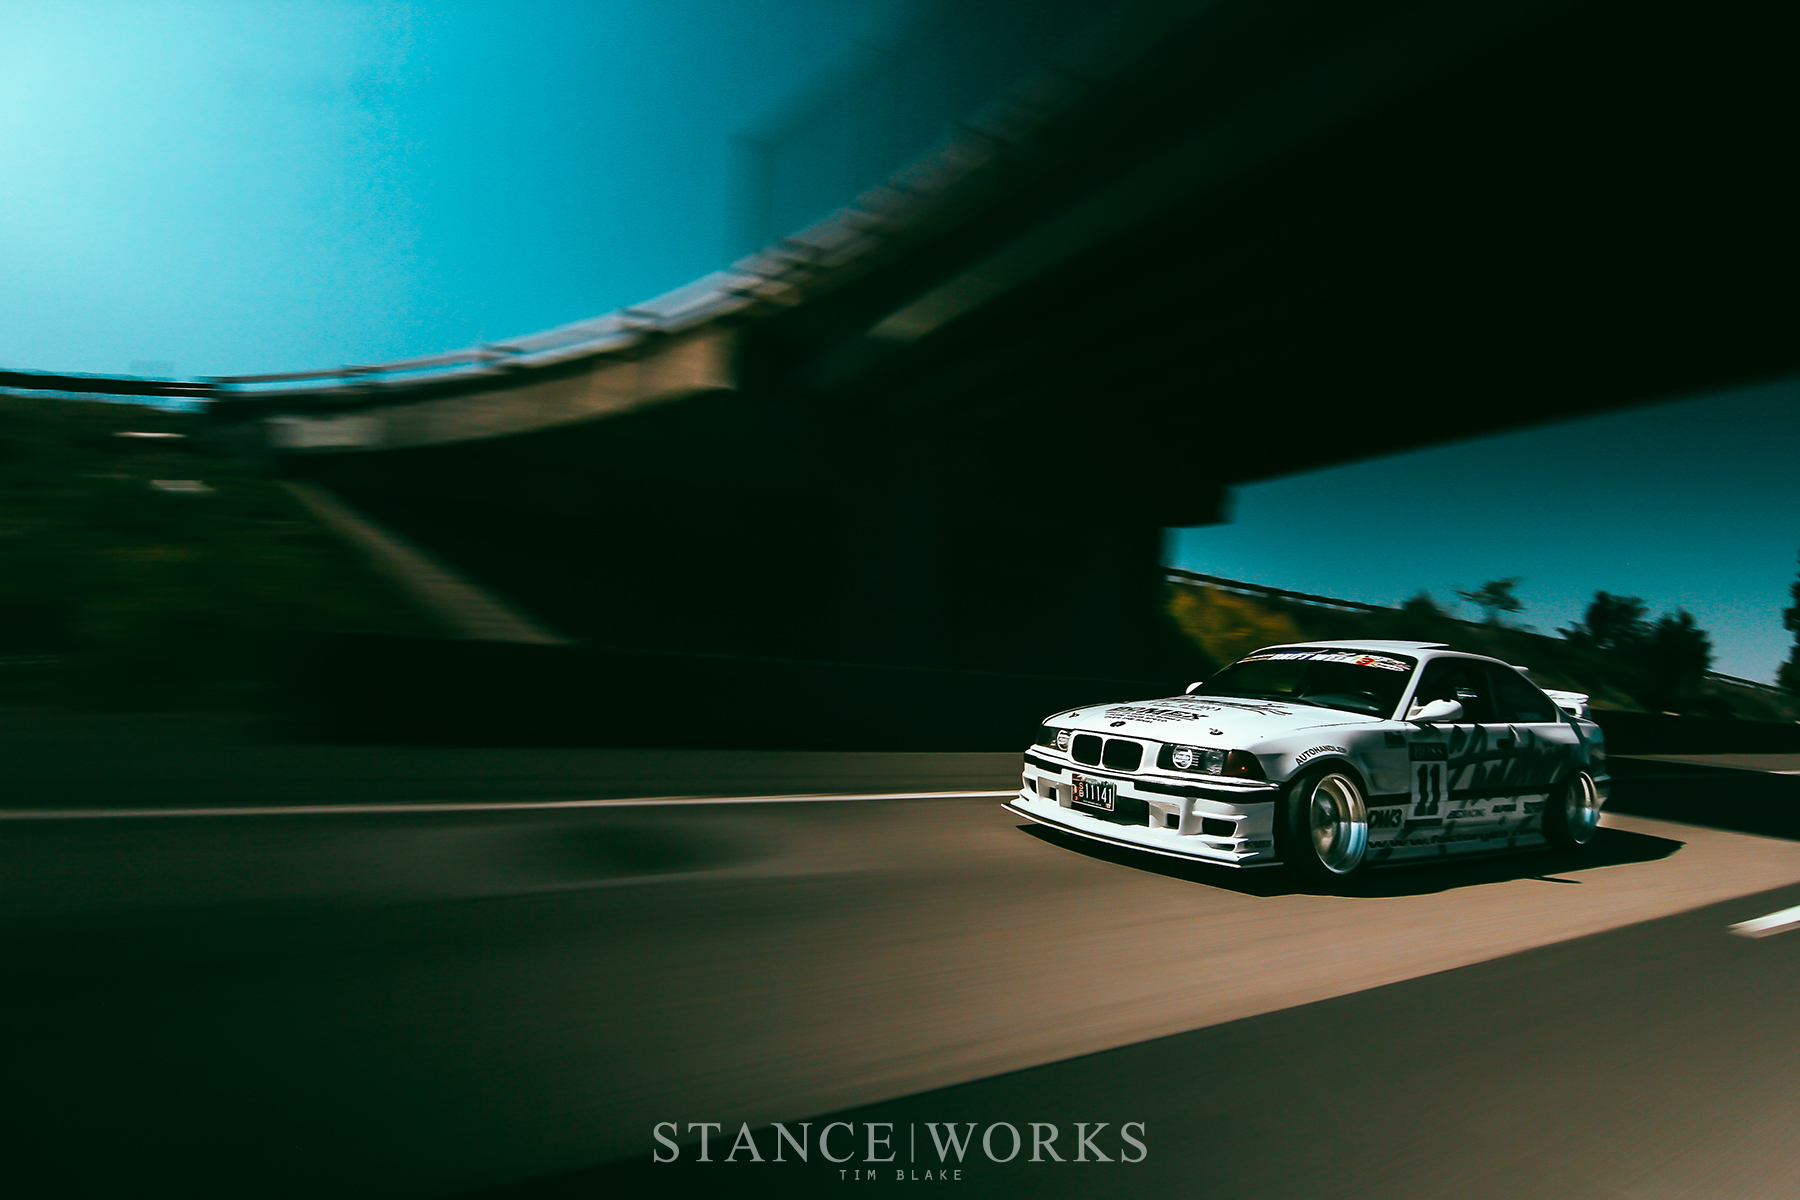 The Value of 11 – Evan Brown and The Autohändler BMW E36 – StanceWorks